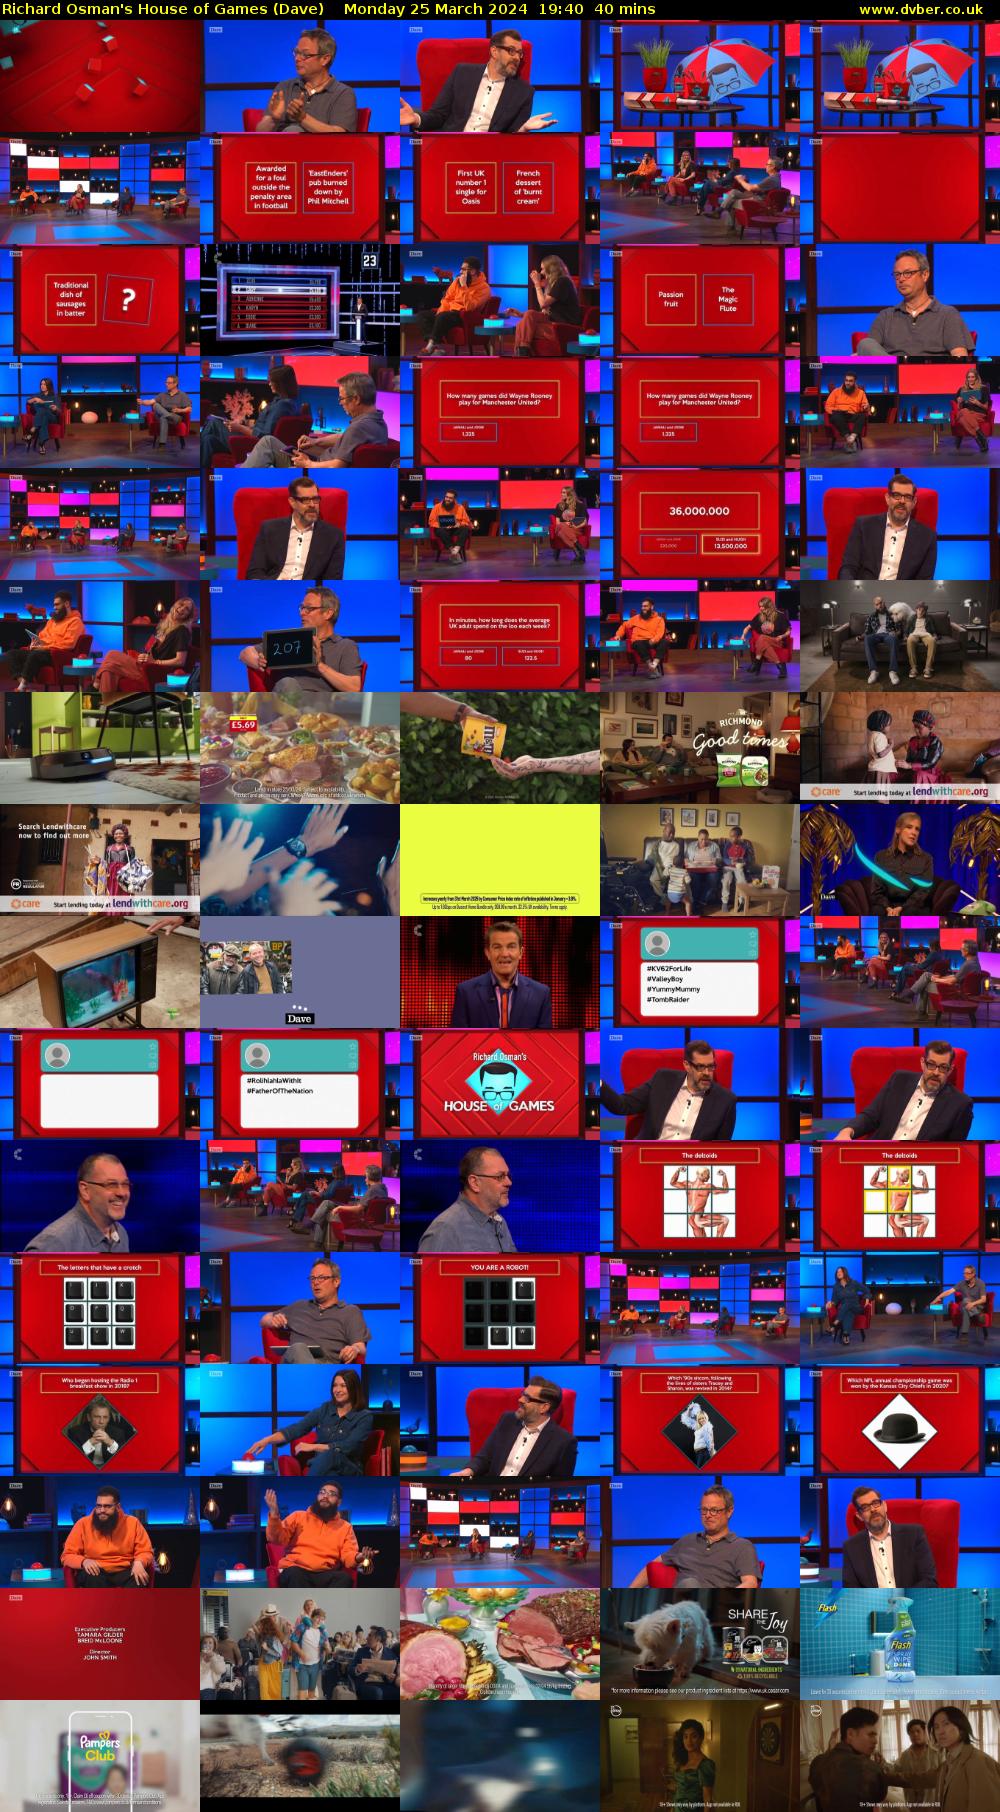 Richard Osman's House of Games (Dave) Monday 25 March 2024 19:40 - 20:20